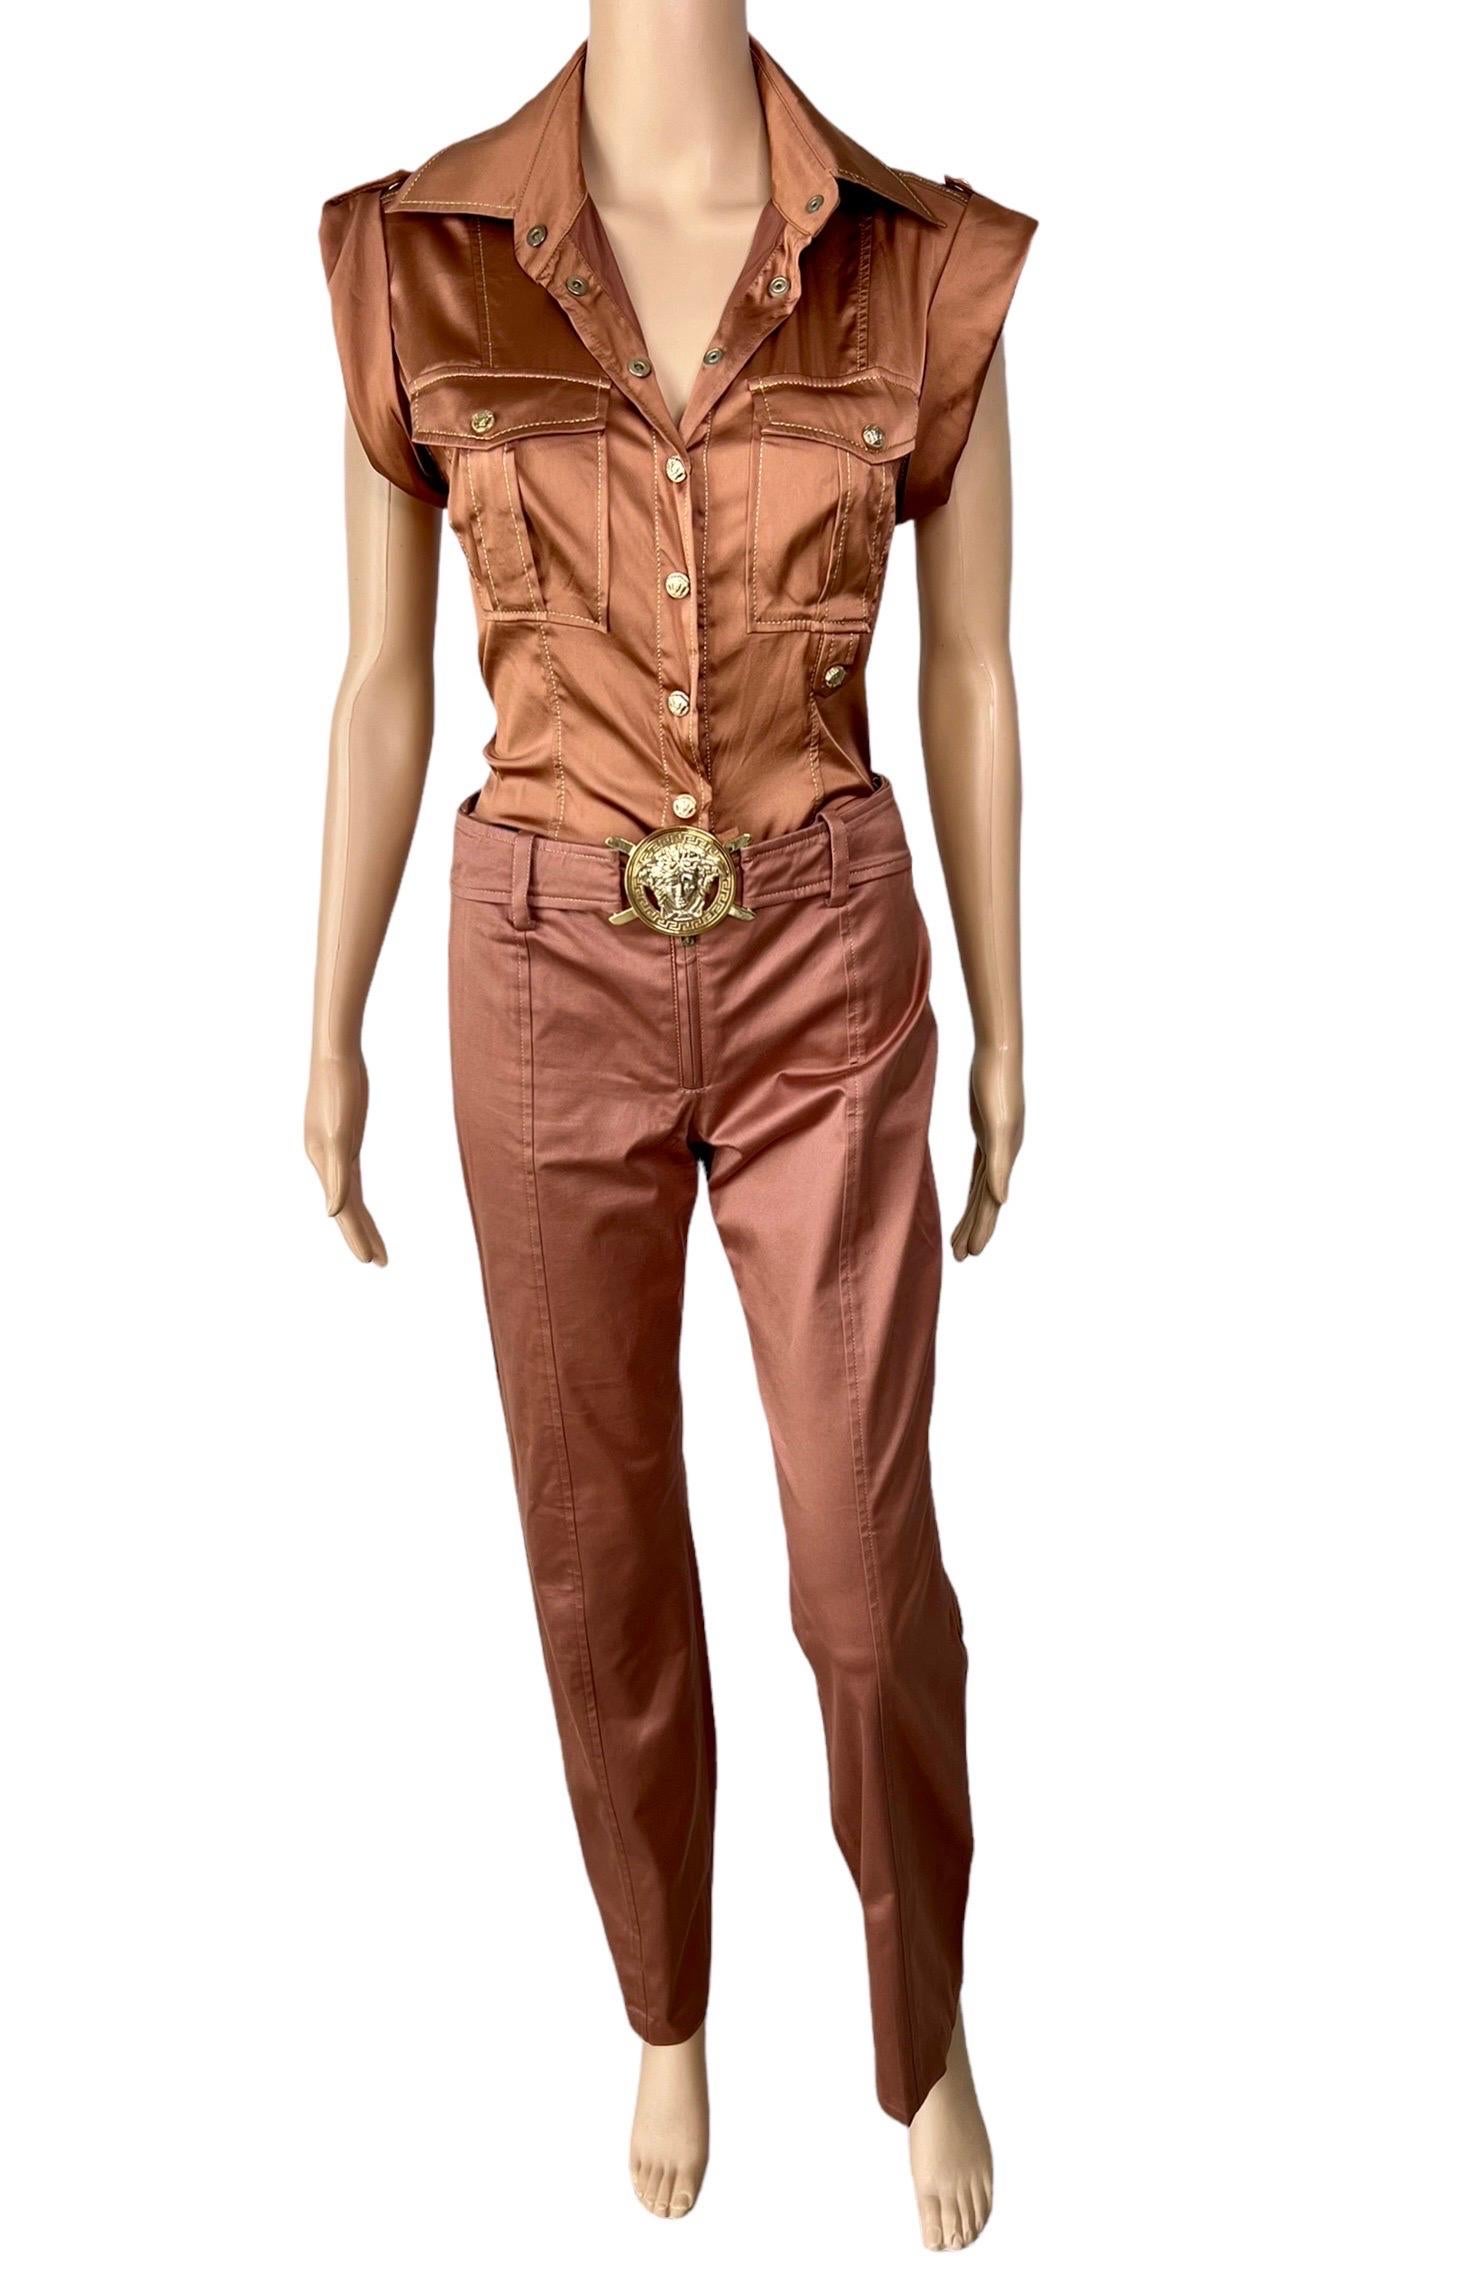 Versace S/S 2005 Runway Blouse Shirt Top & Medusa Logo Belted Pants 2 Piece Set In Good Condition For Sale In Naples, FL